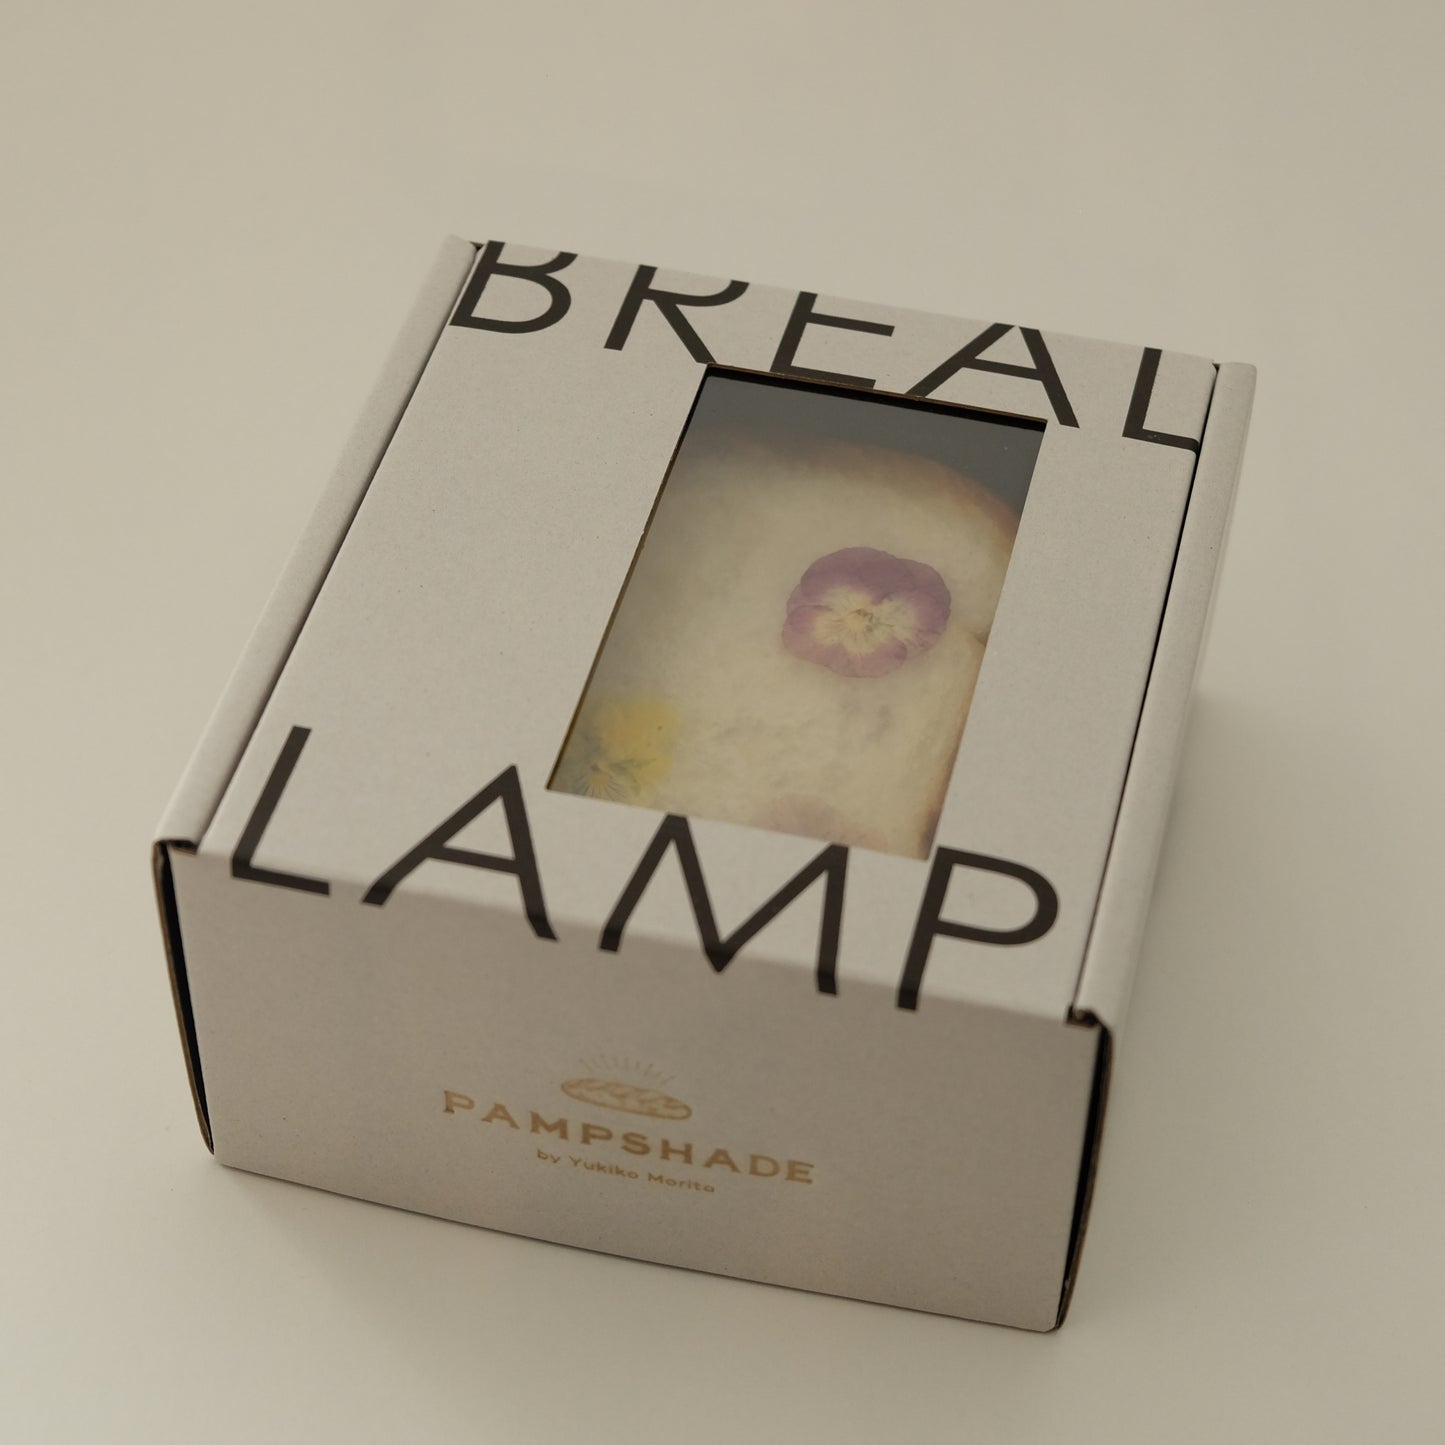 Dauphinette x Pampshade Bread Lamp with Flowers
(Limited Edition)